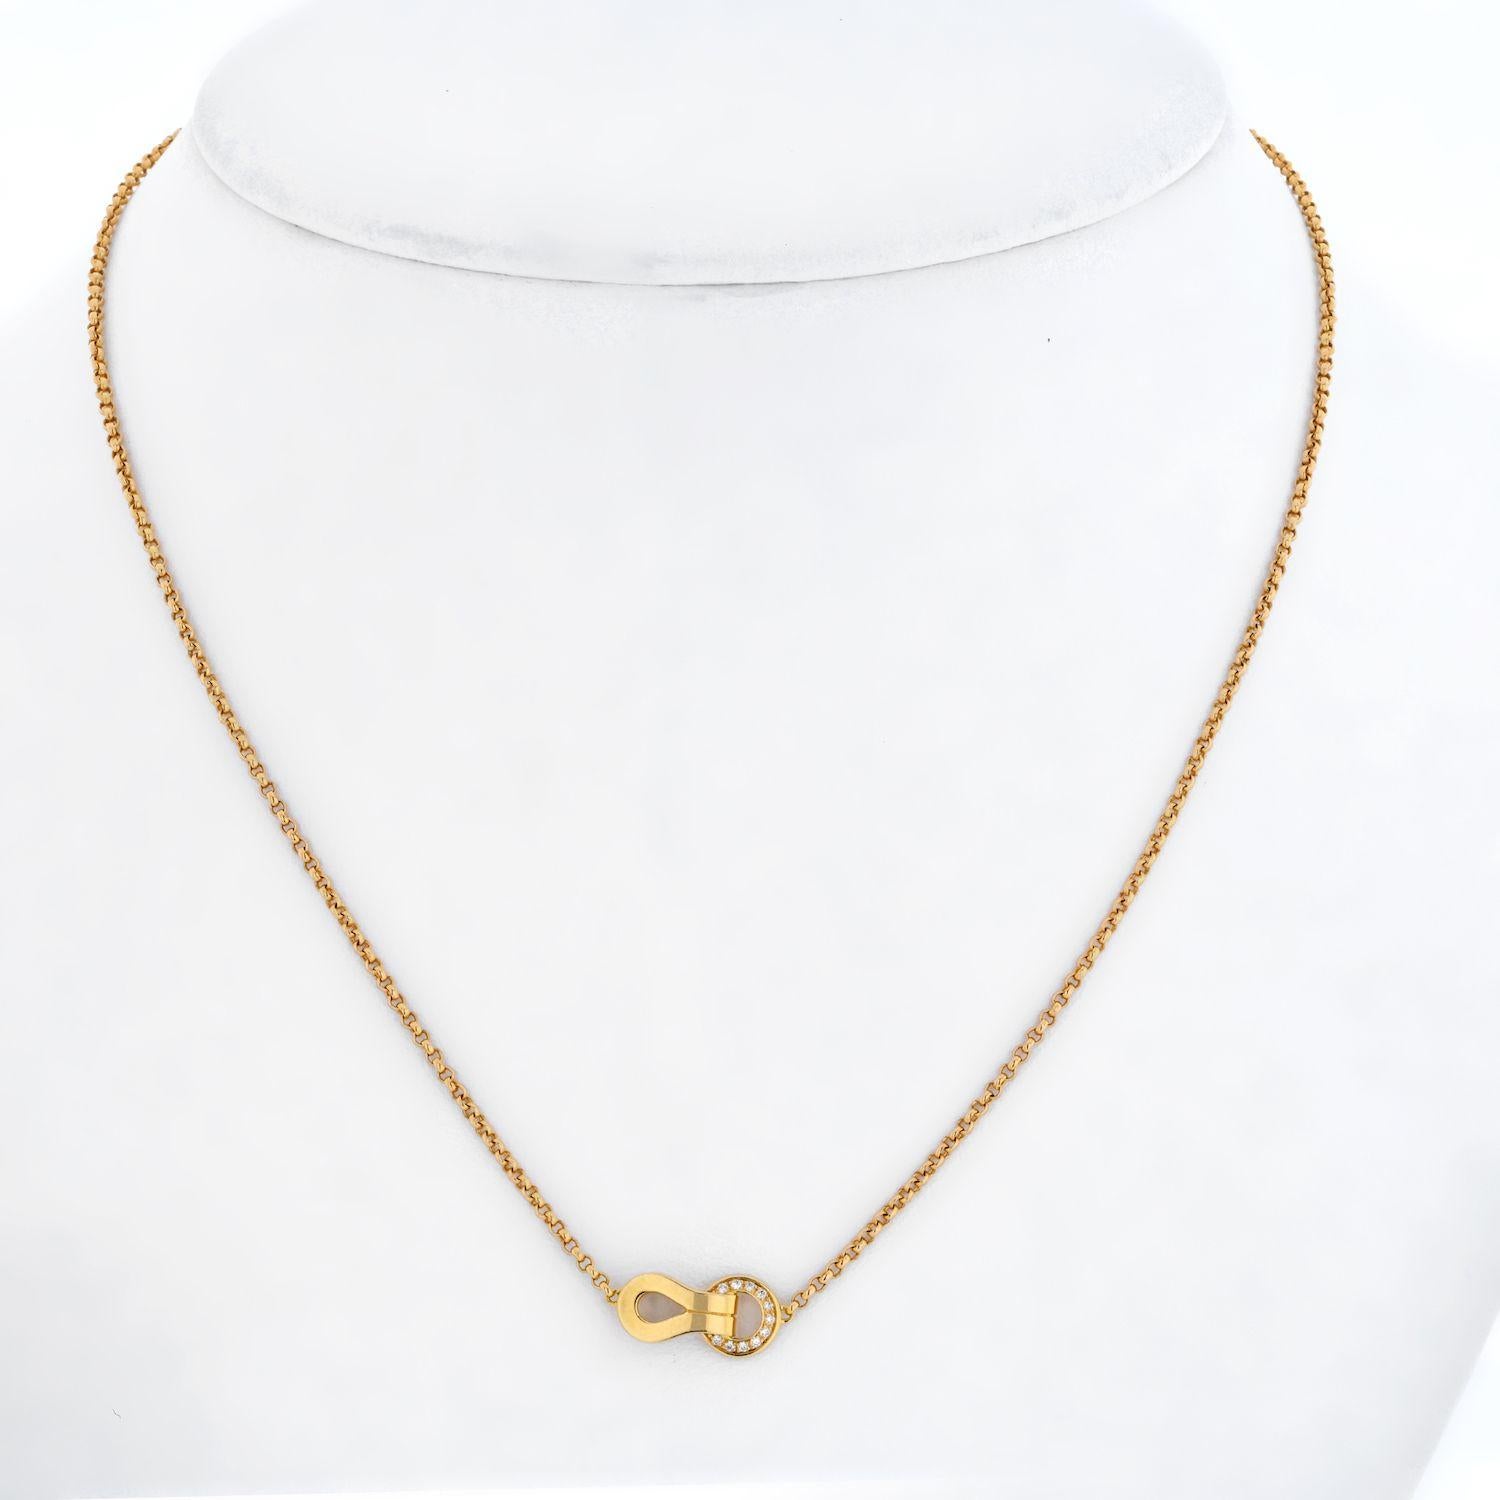 This elegant necklace is by Cartier, it is crafted from 18k rose gold with a polished finish. The pendant features a loop interlock with a diamond decorated circle, it is attached to a classic rolo link chain and is signed by the designer with the